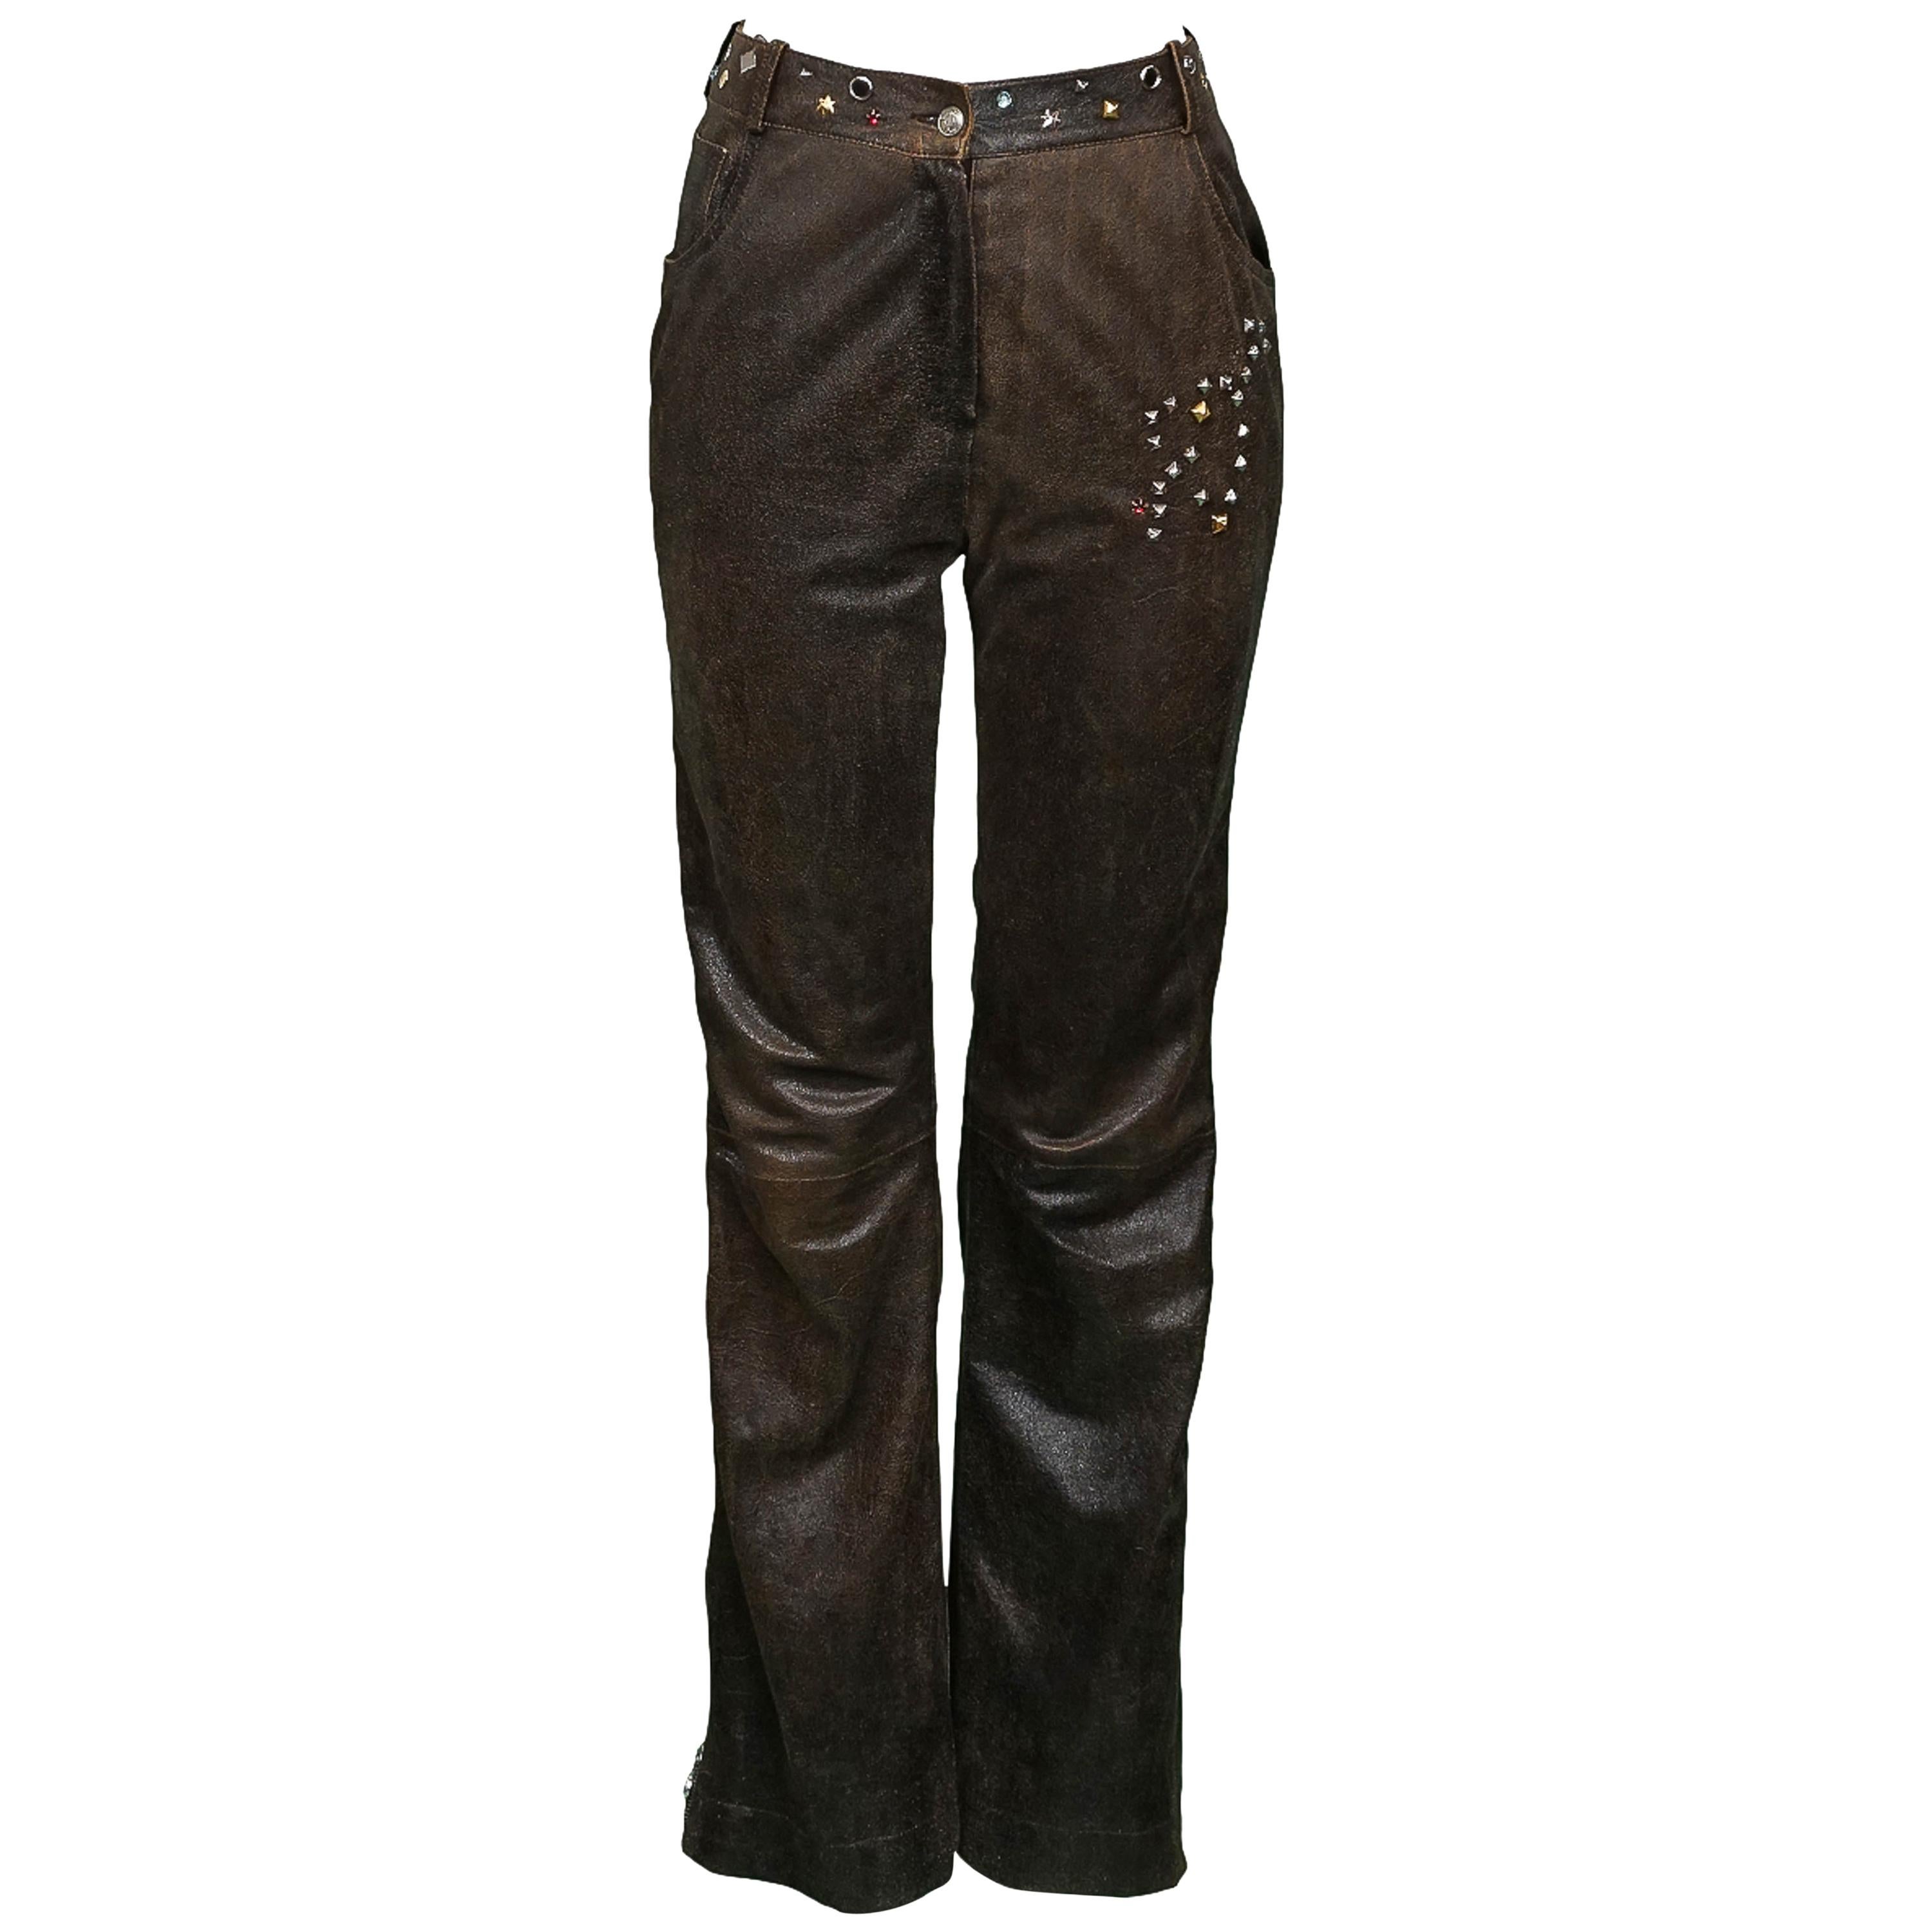 Vintage John Galliano for Christian Dior brown lambskin leather pants featuring gold & silver tone multi-shape studs, rhinestone embellishments and functional hem to pocket zipper side detail creating the ultimate slit. Runway piece from the